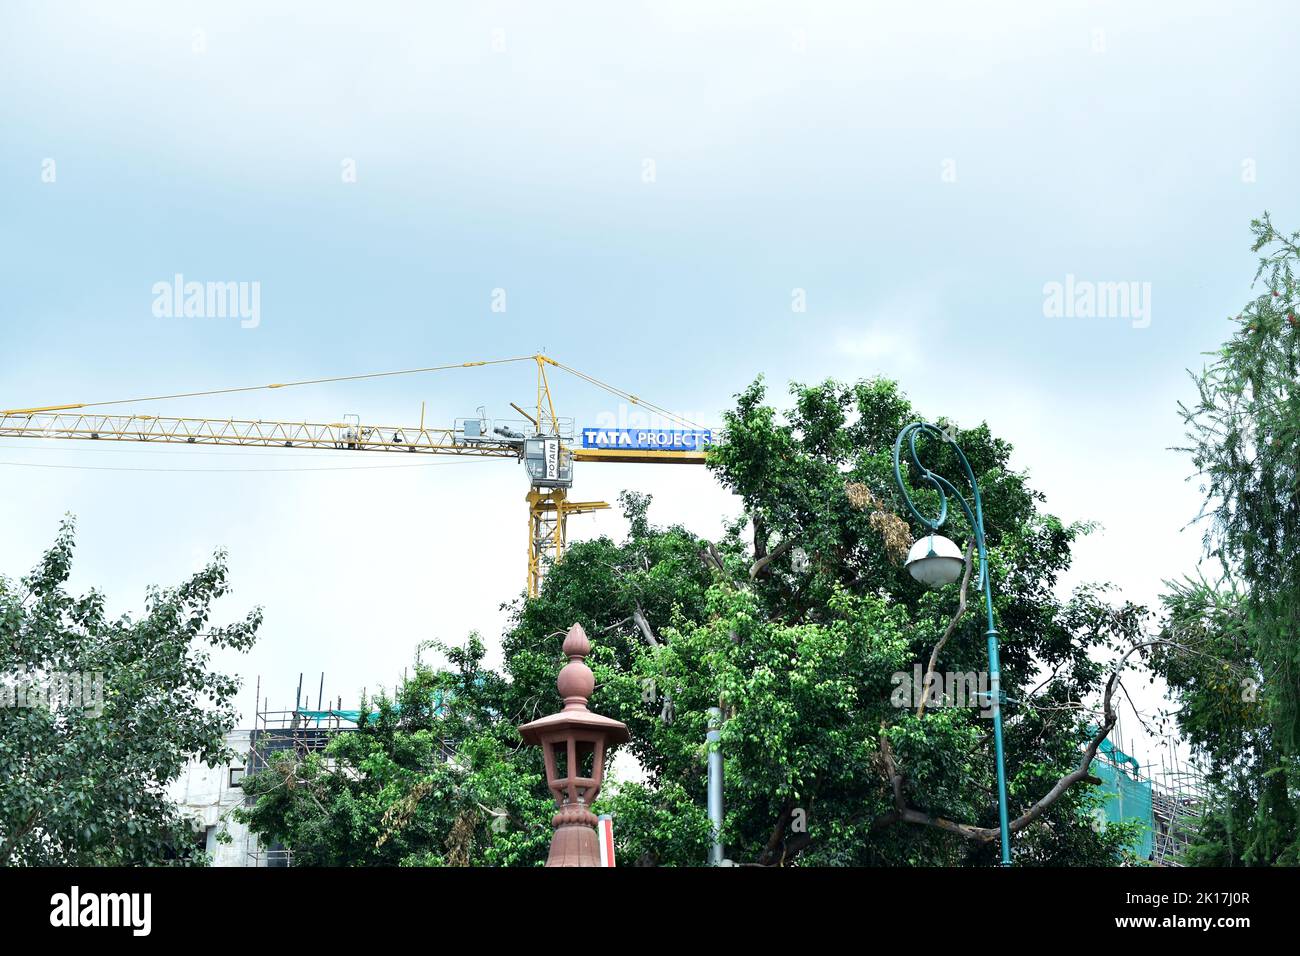 New Delhi, India - 14 September 2022 : Tata projects crane working on construction site Stock Photo